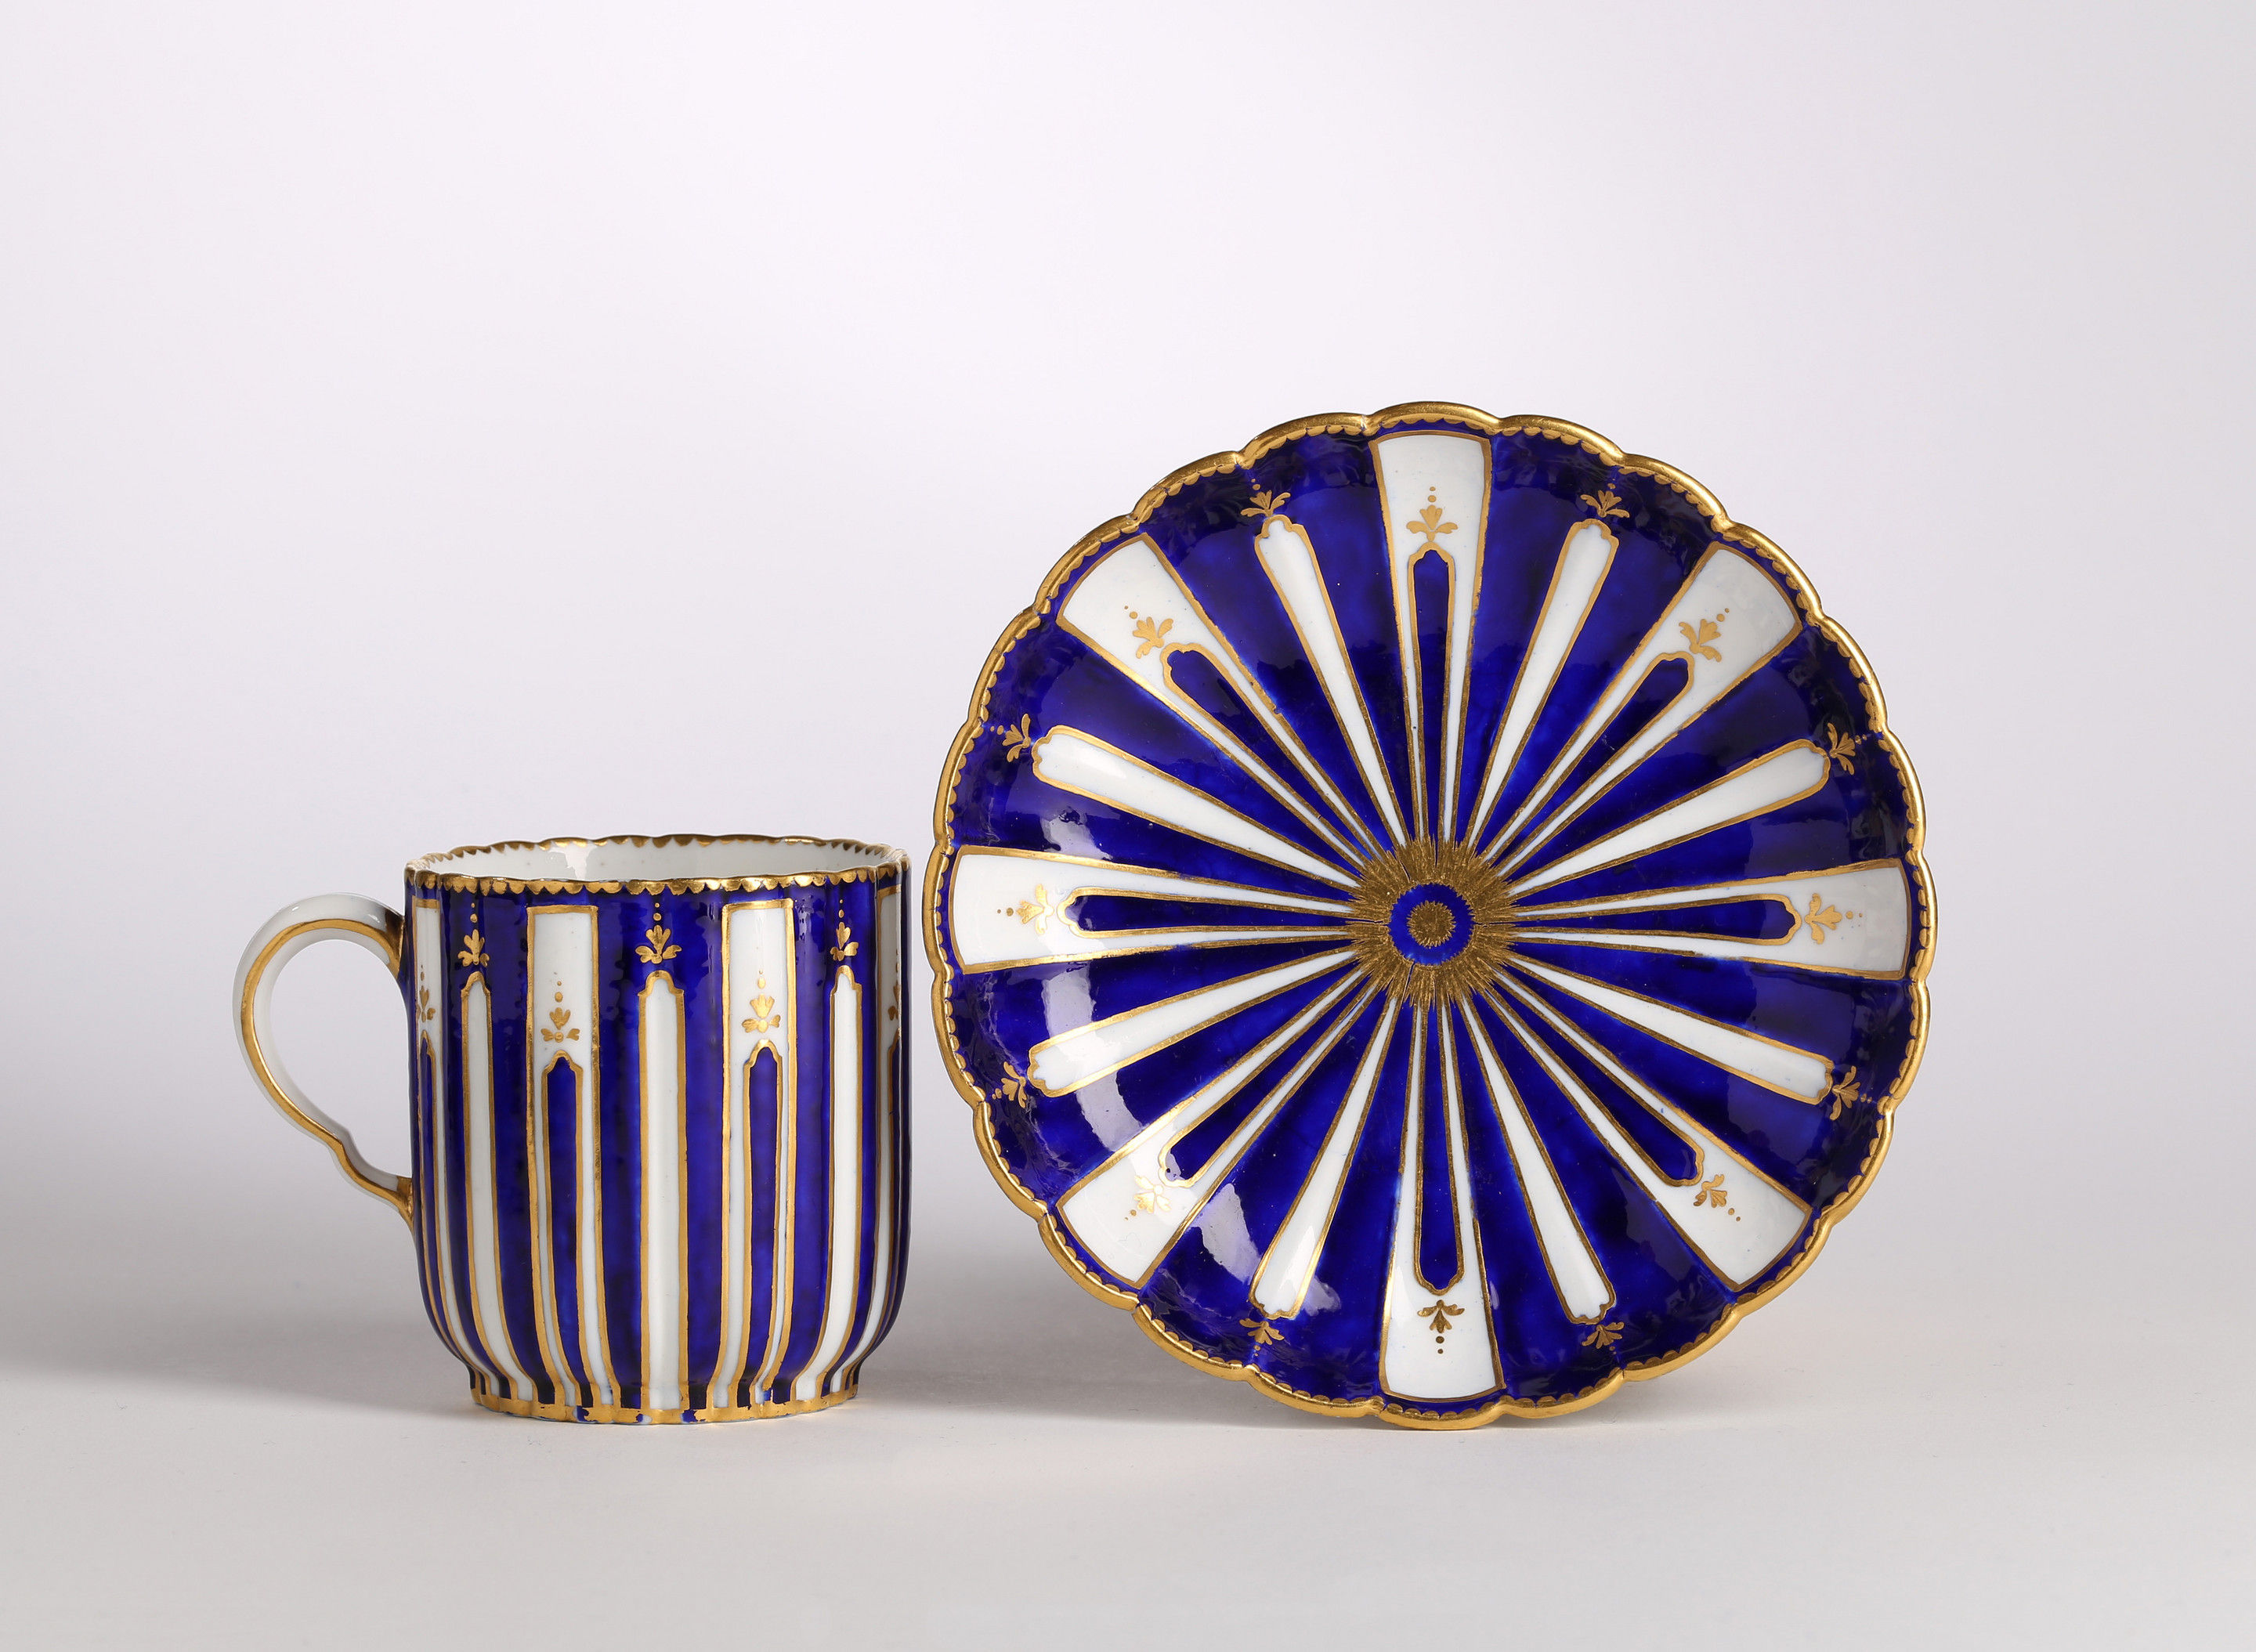 A Sèvres gobelet ‘cannelé’ and saucer of the first size